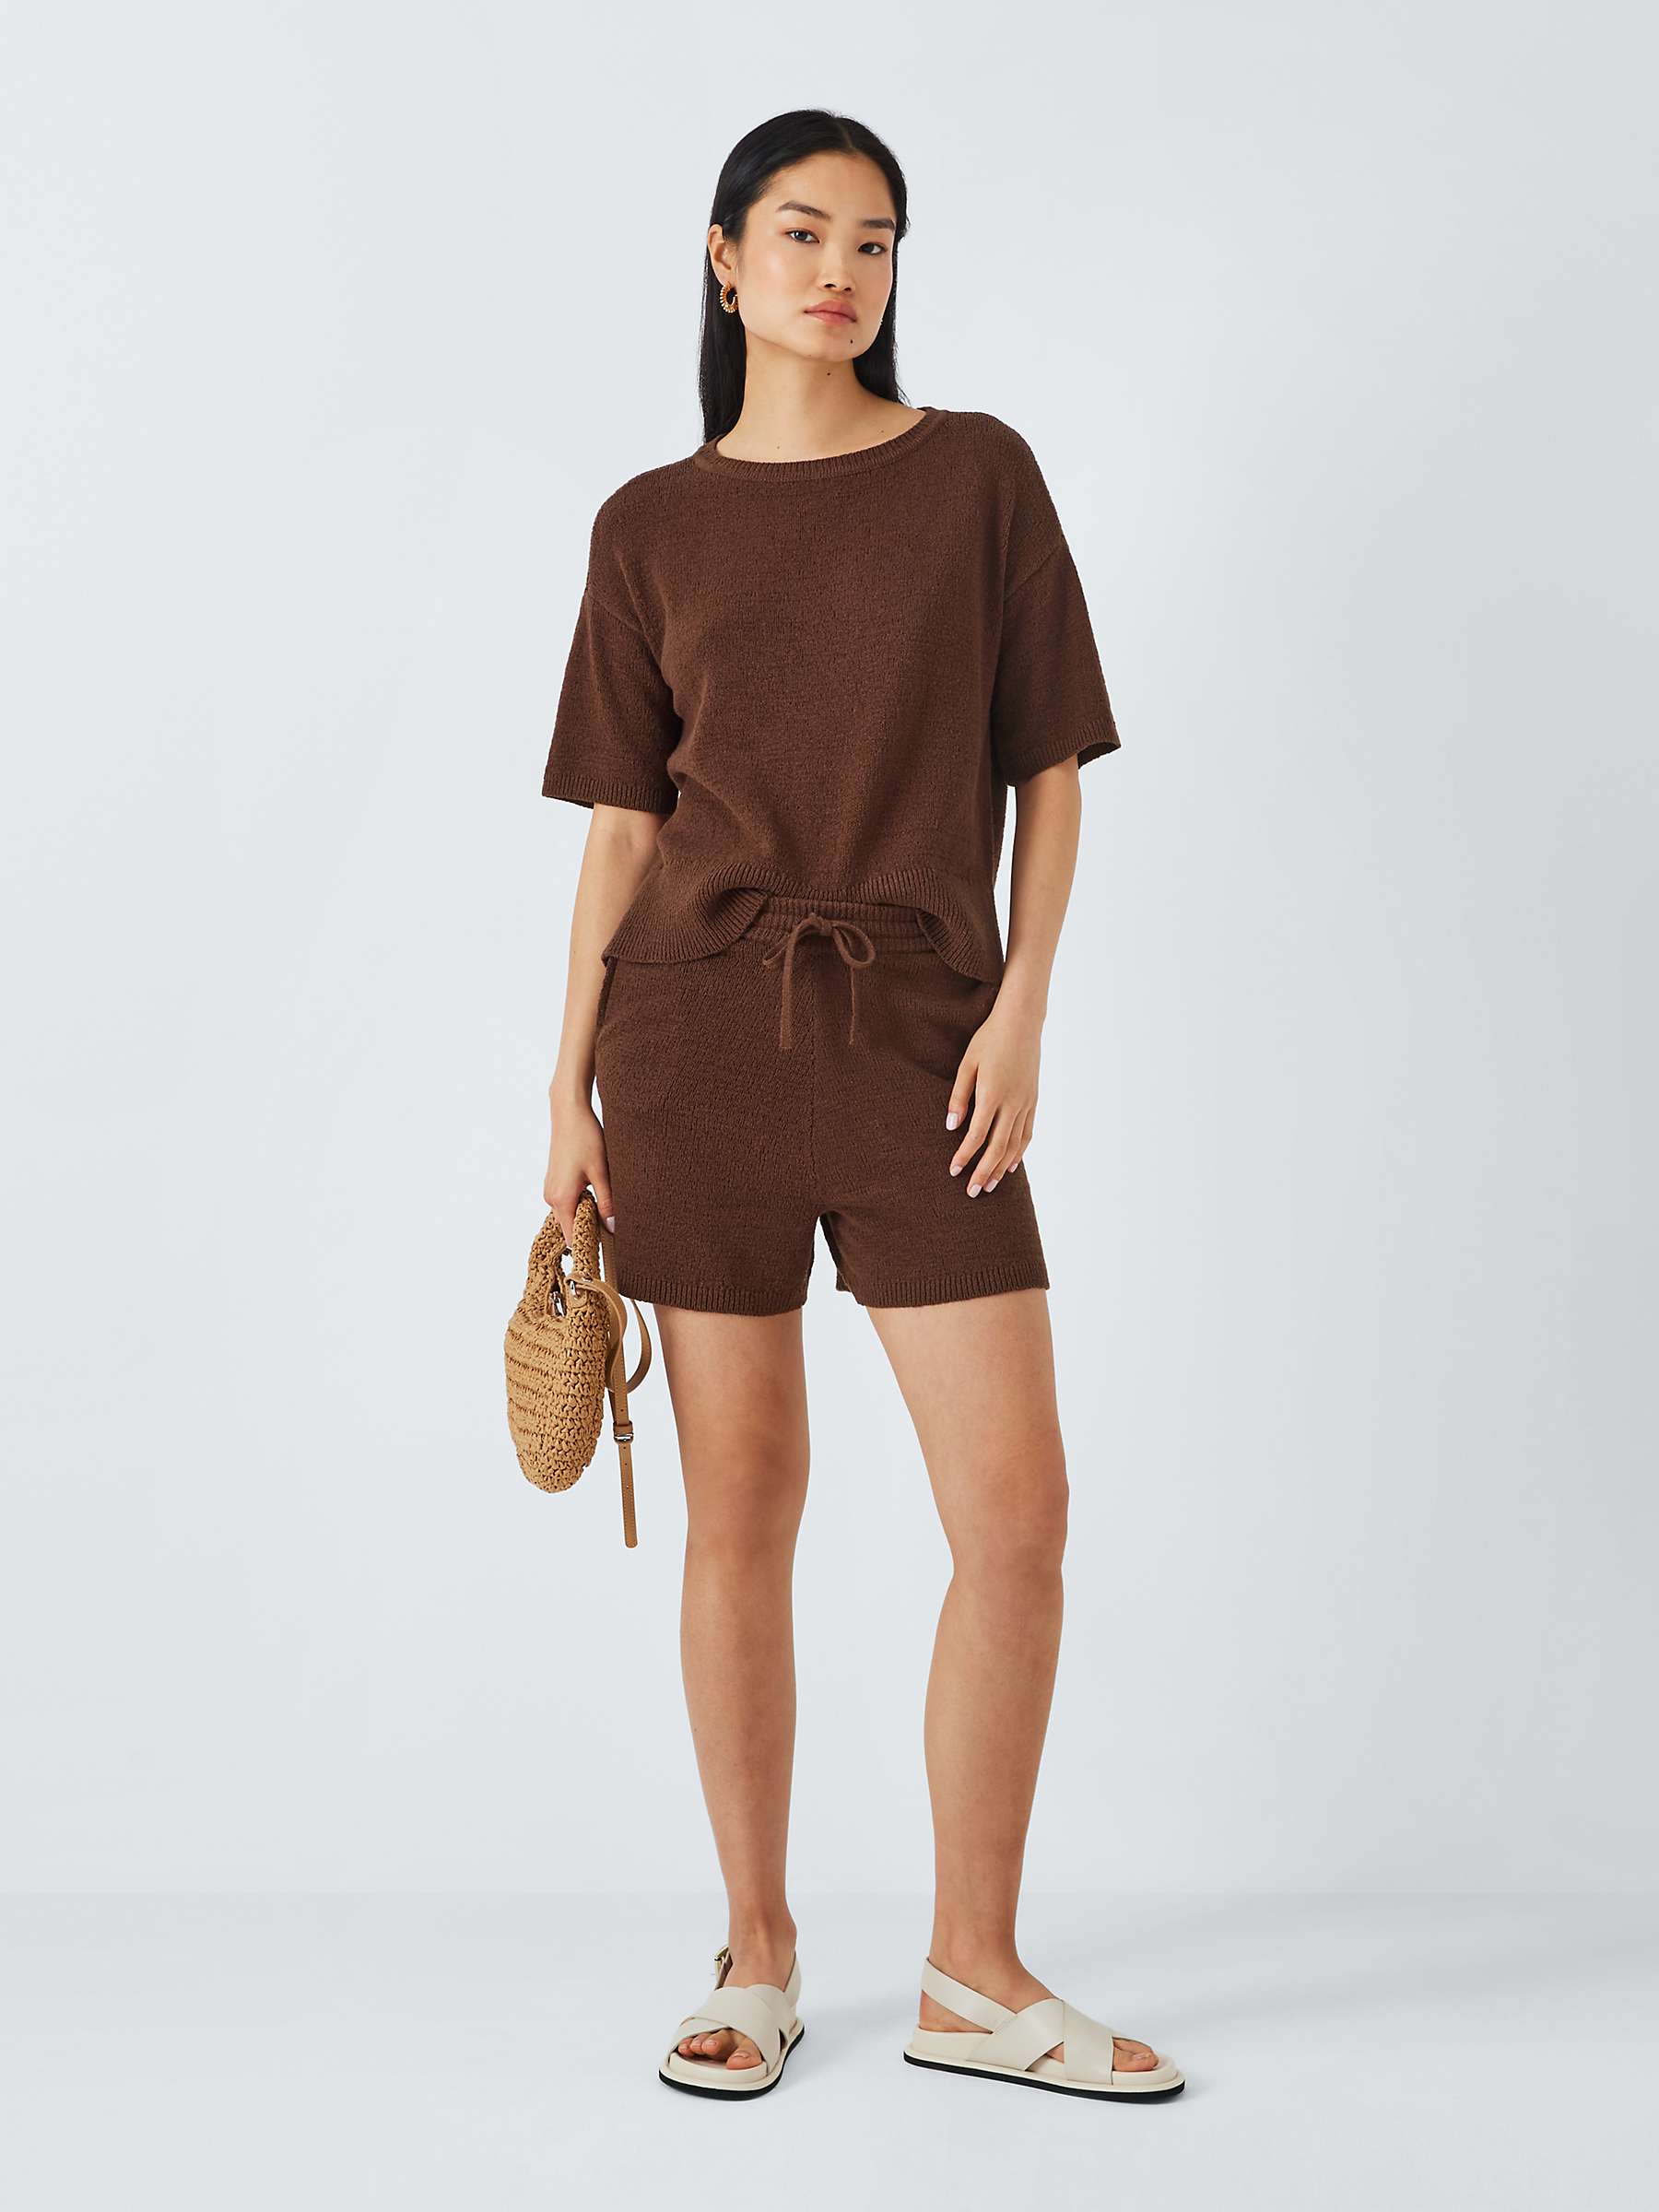 Buy John Lewis ANYDAY Knitted Shorts, Brown Online at johnlewis.com